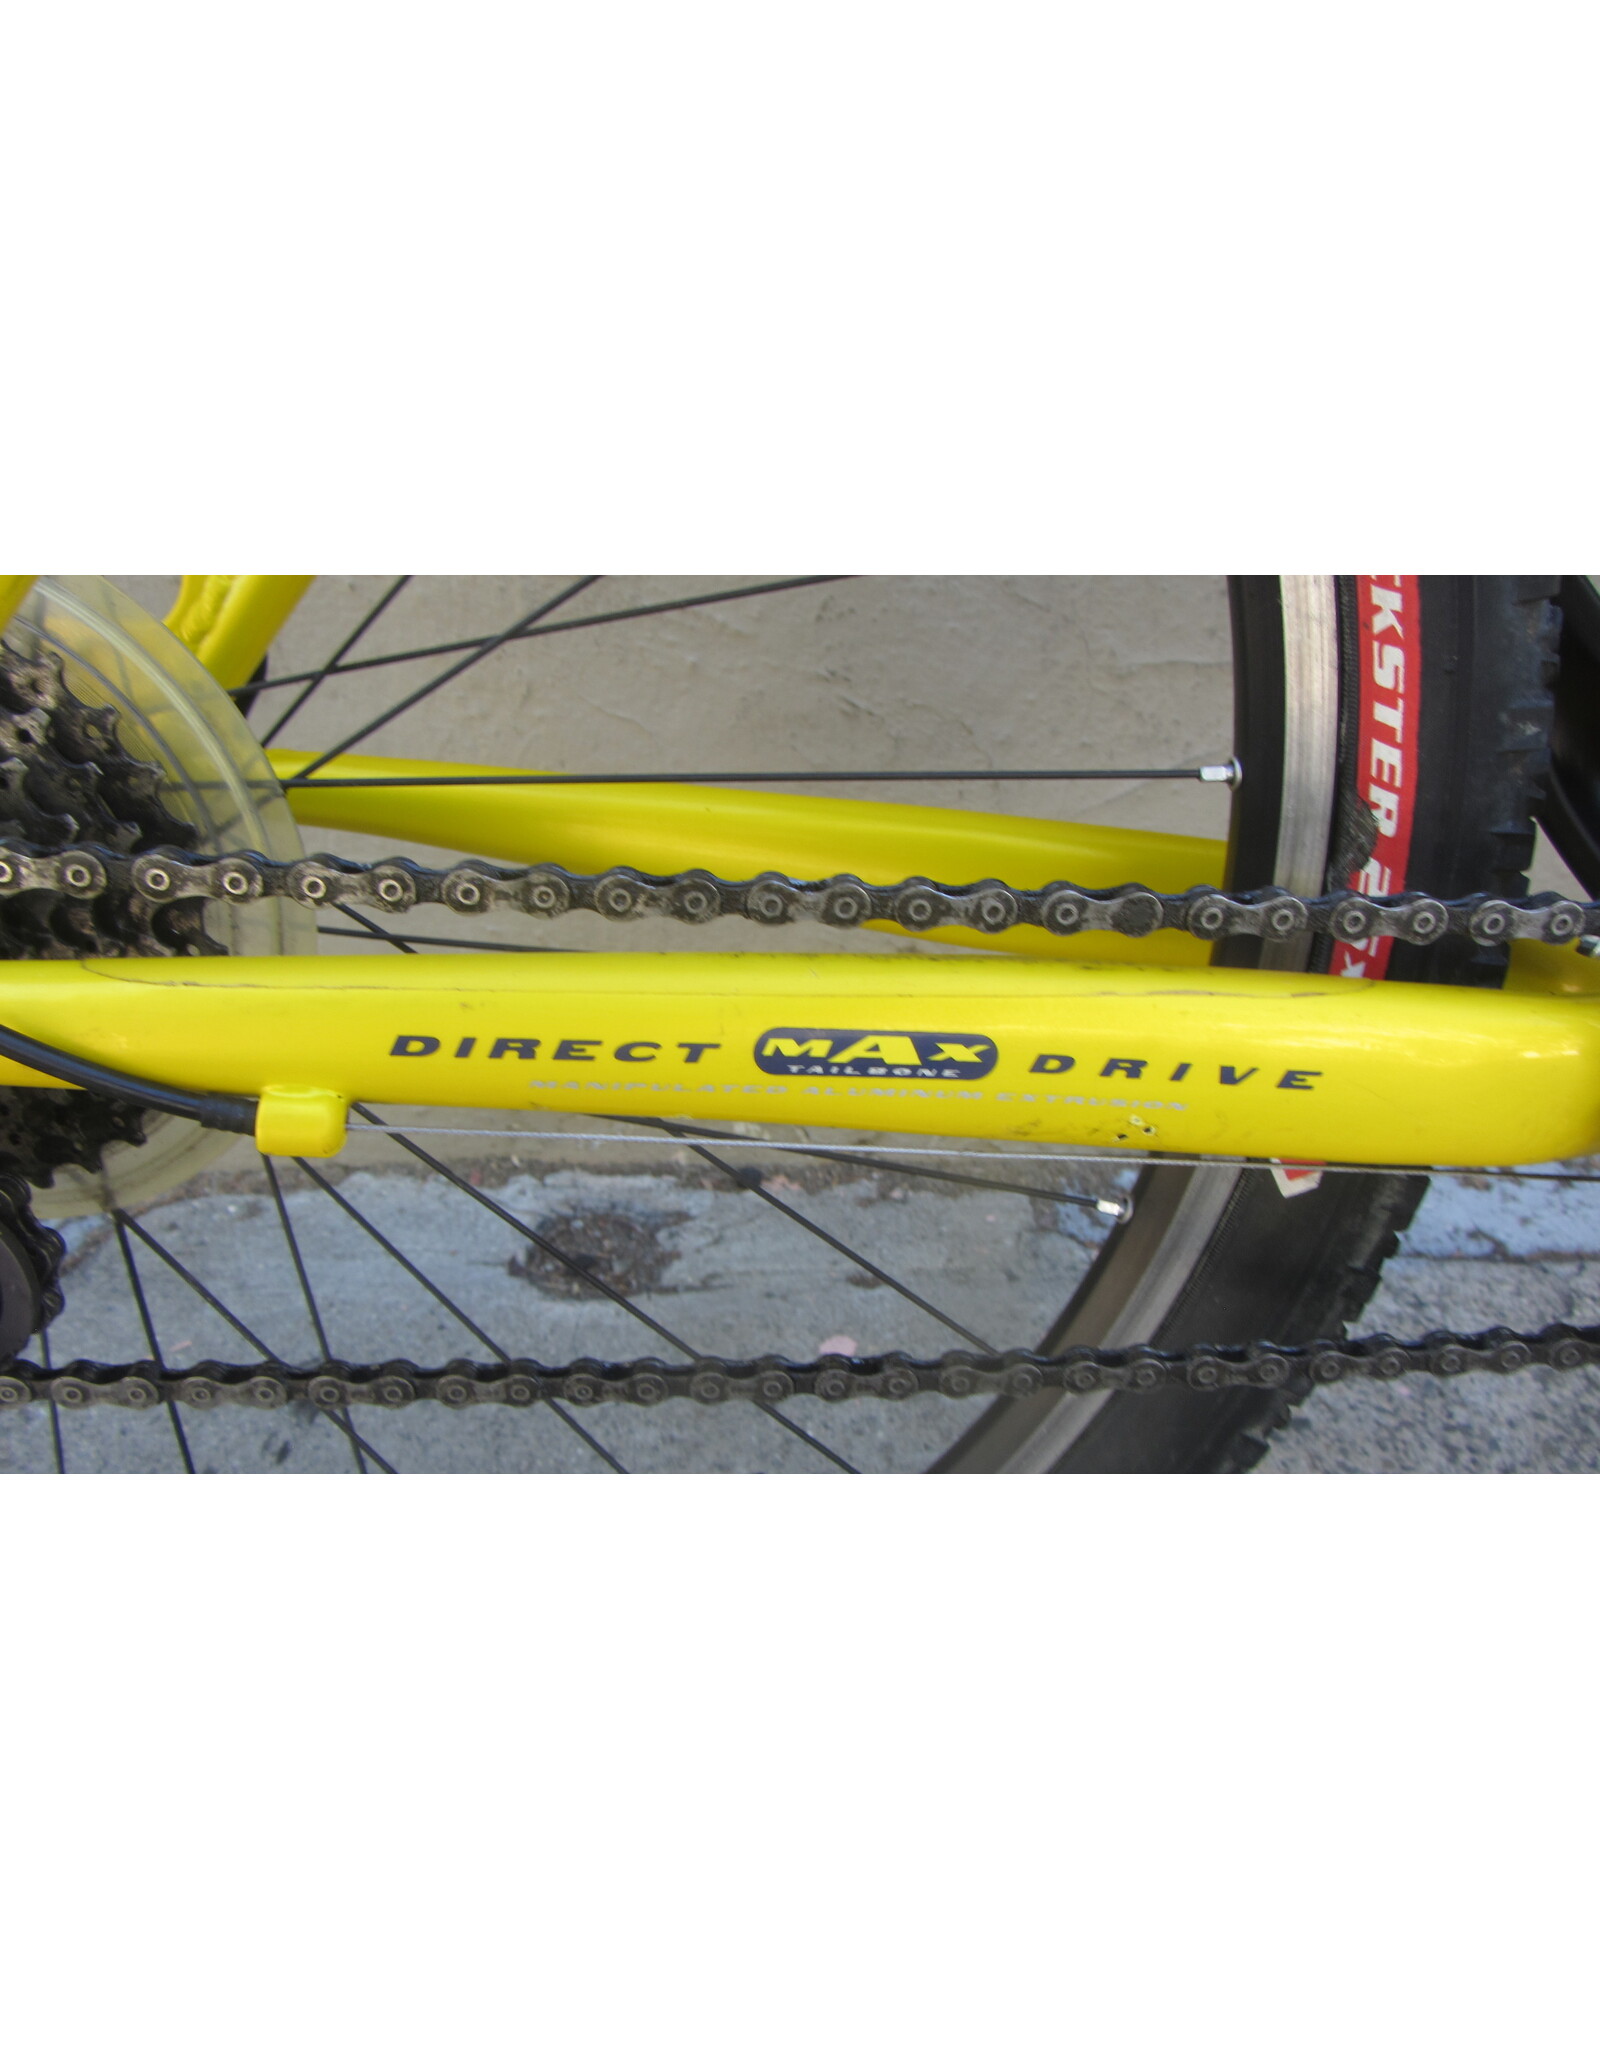 Specialized Specialized Stumpjumper, 2002, 18 inches, Yellow